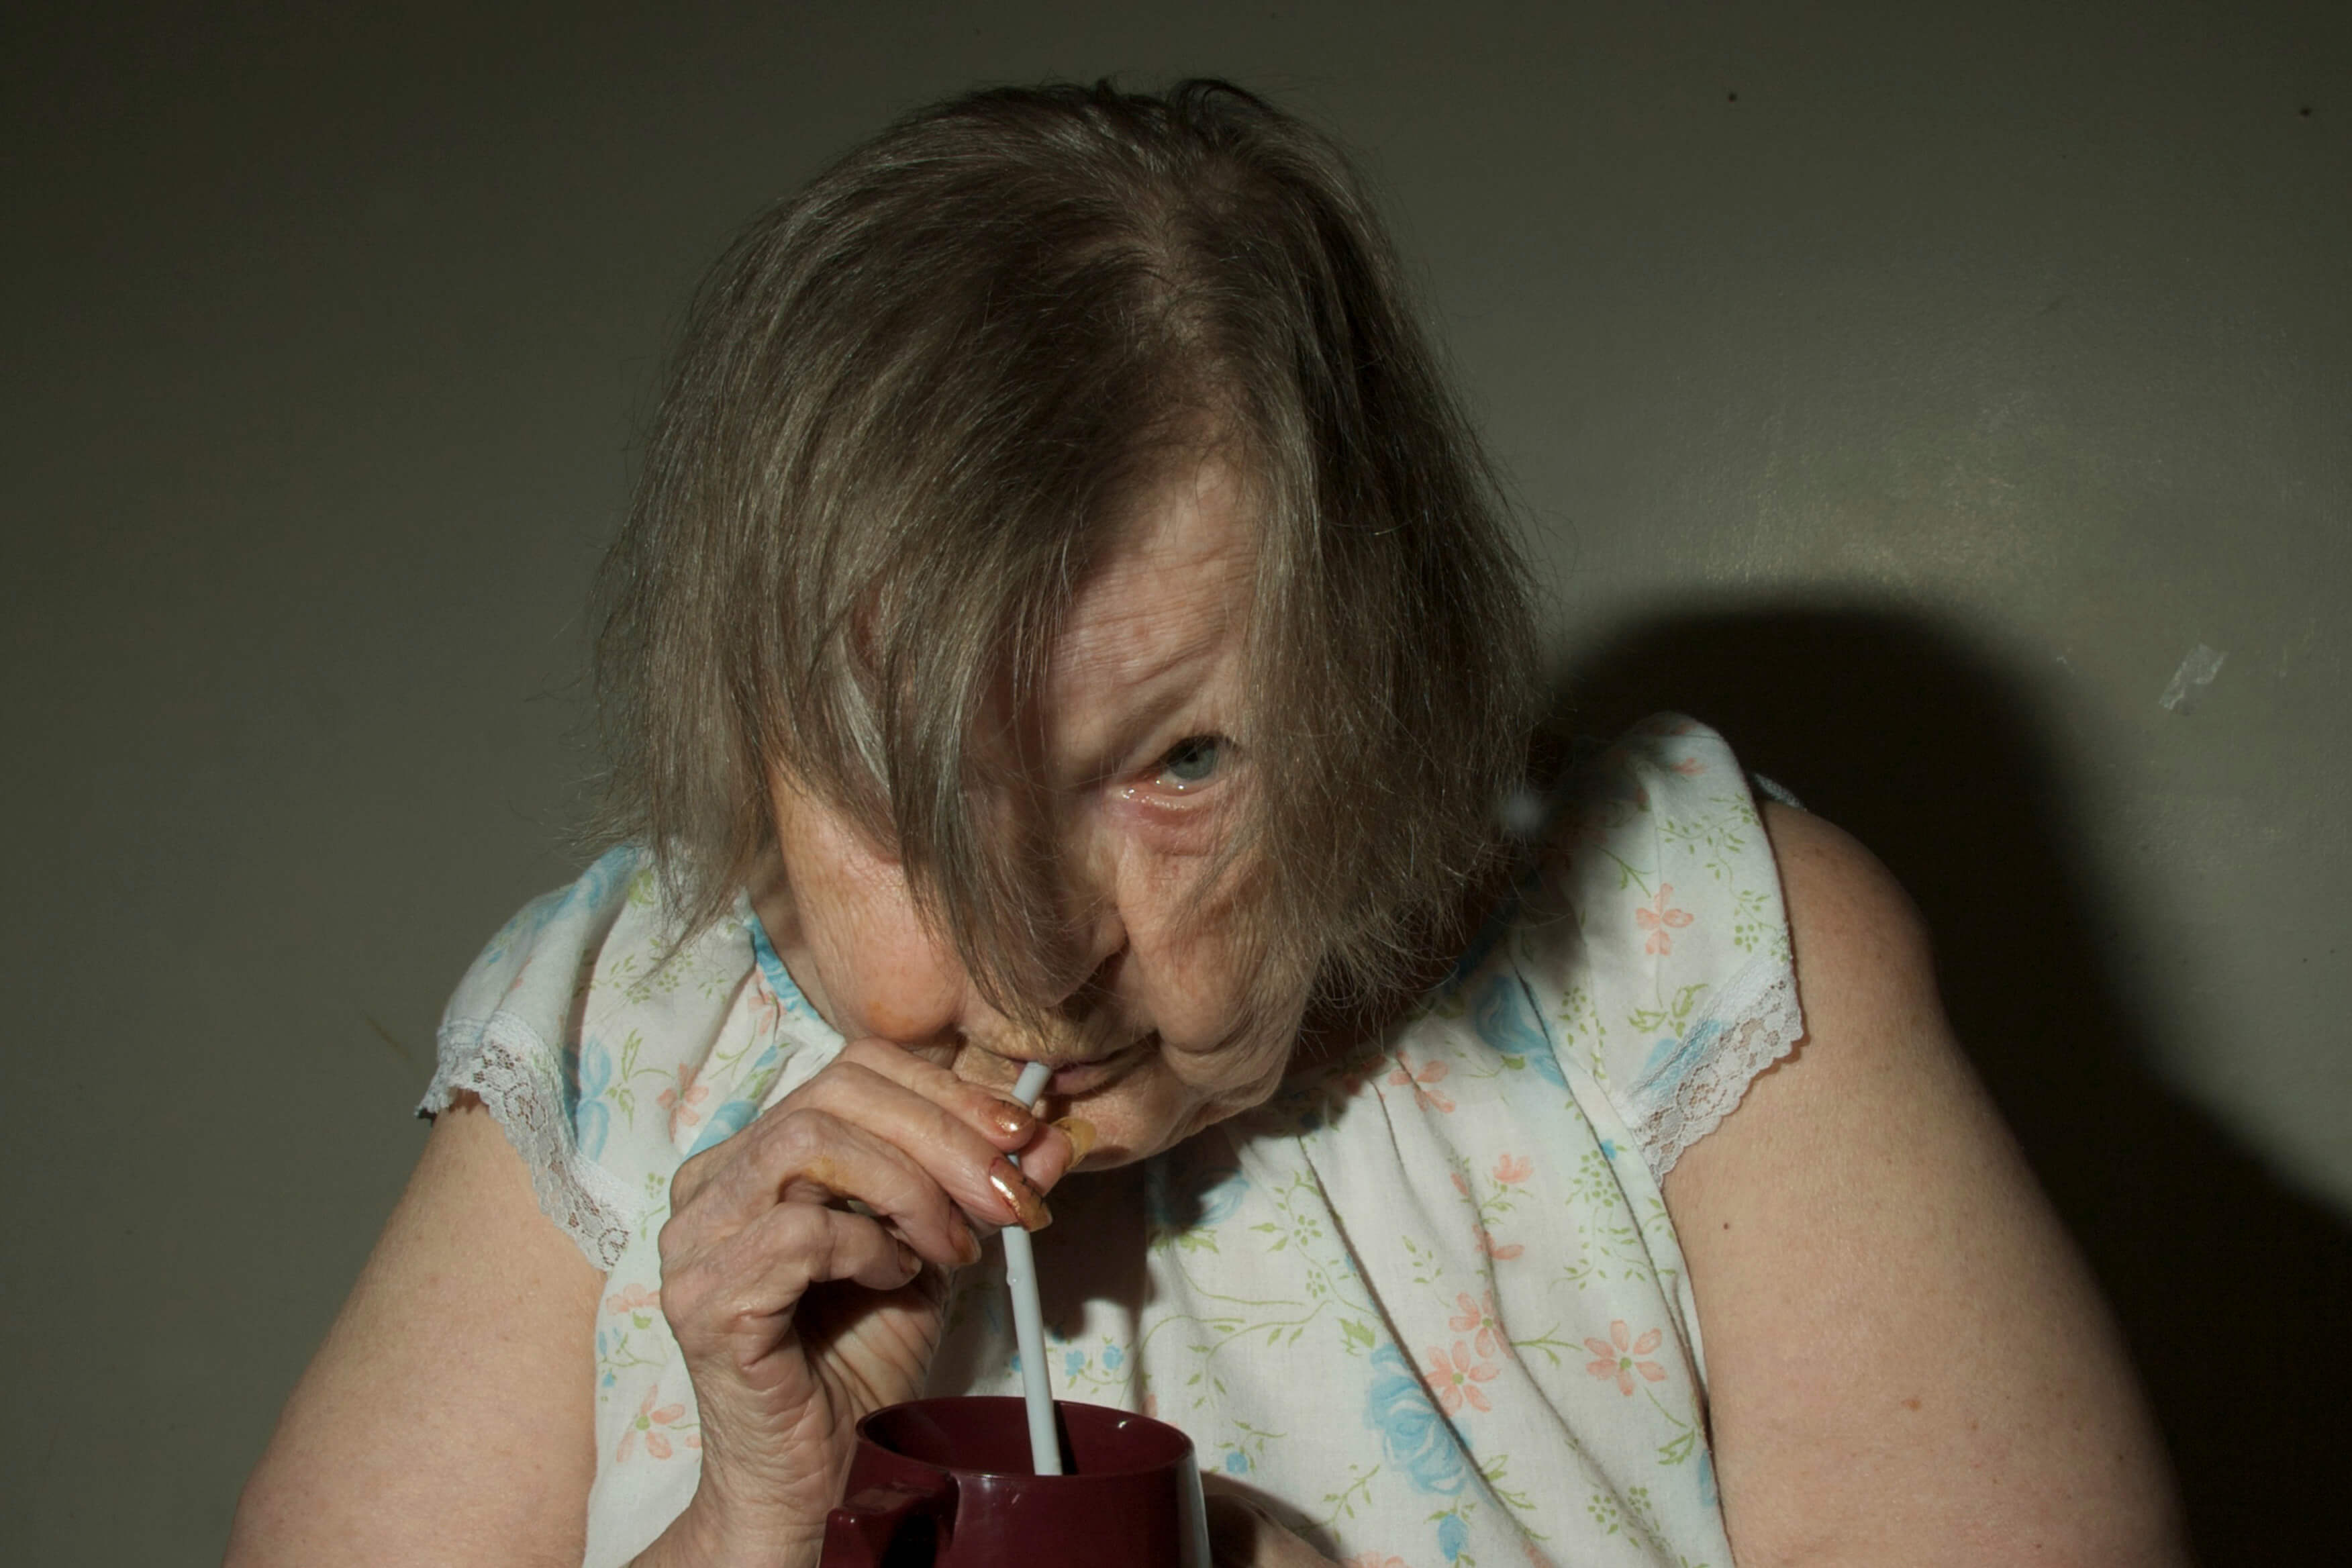 Still from The Patron Saints. A person stands in front of the camera wearing a sleeveless nightgown. They hold a straw to their mouth and peer up at the camera from between their hair which falls down over each side of their face.